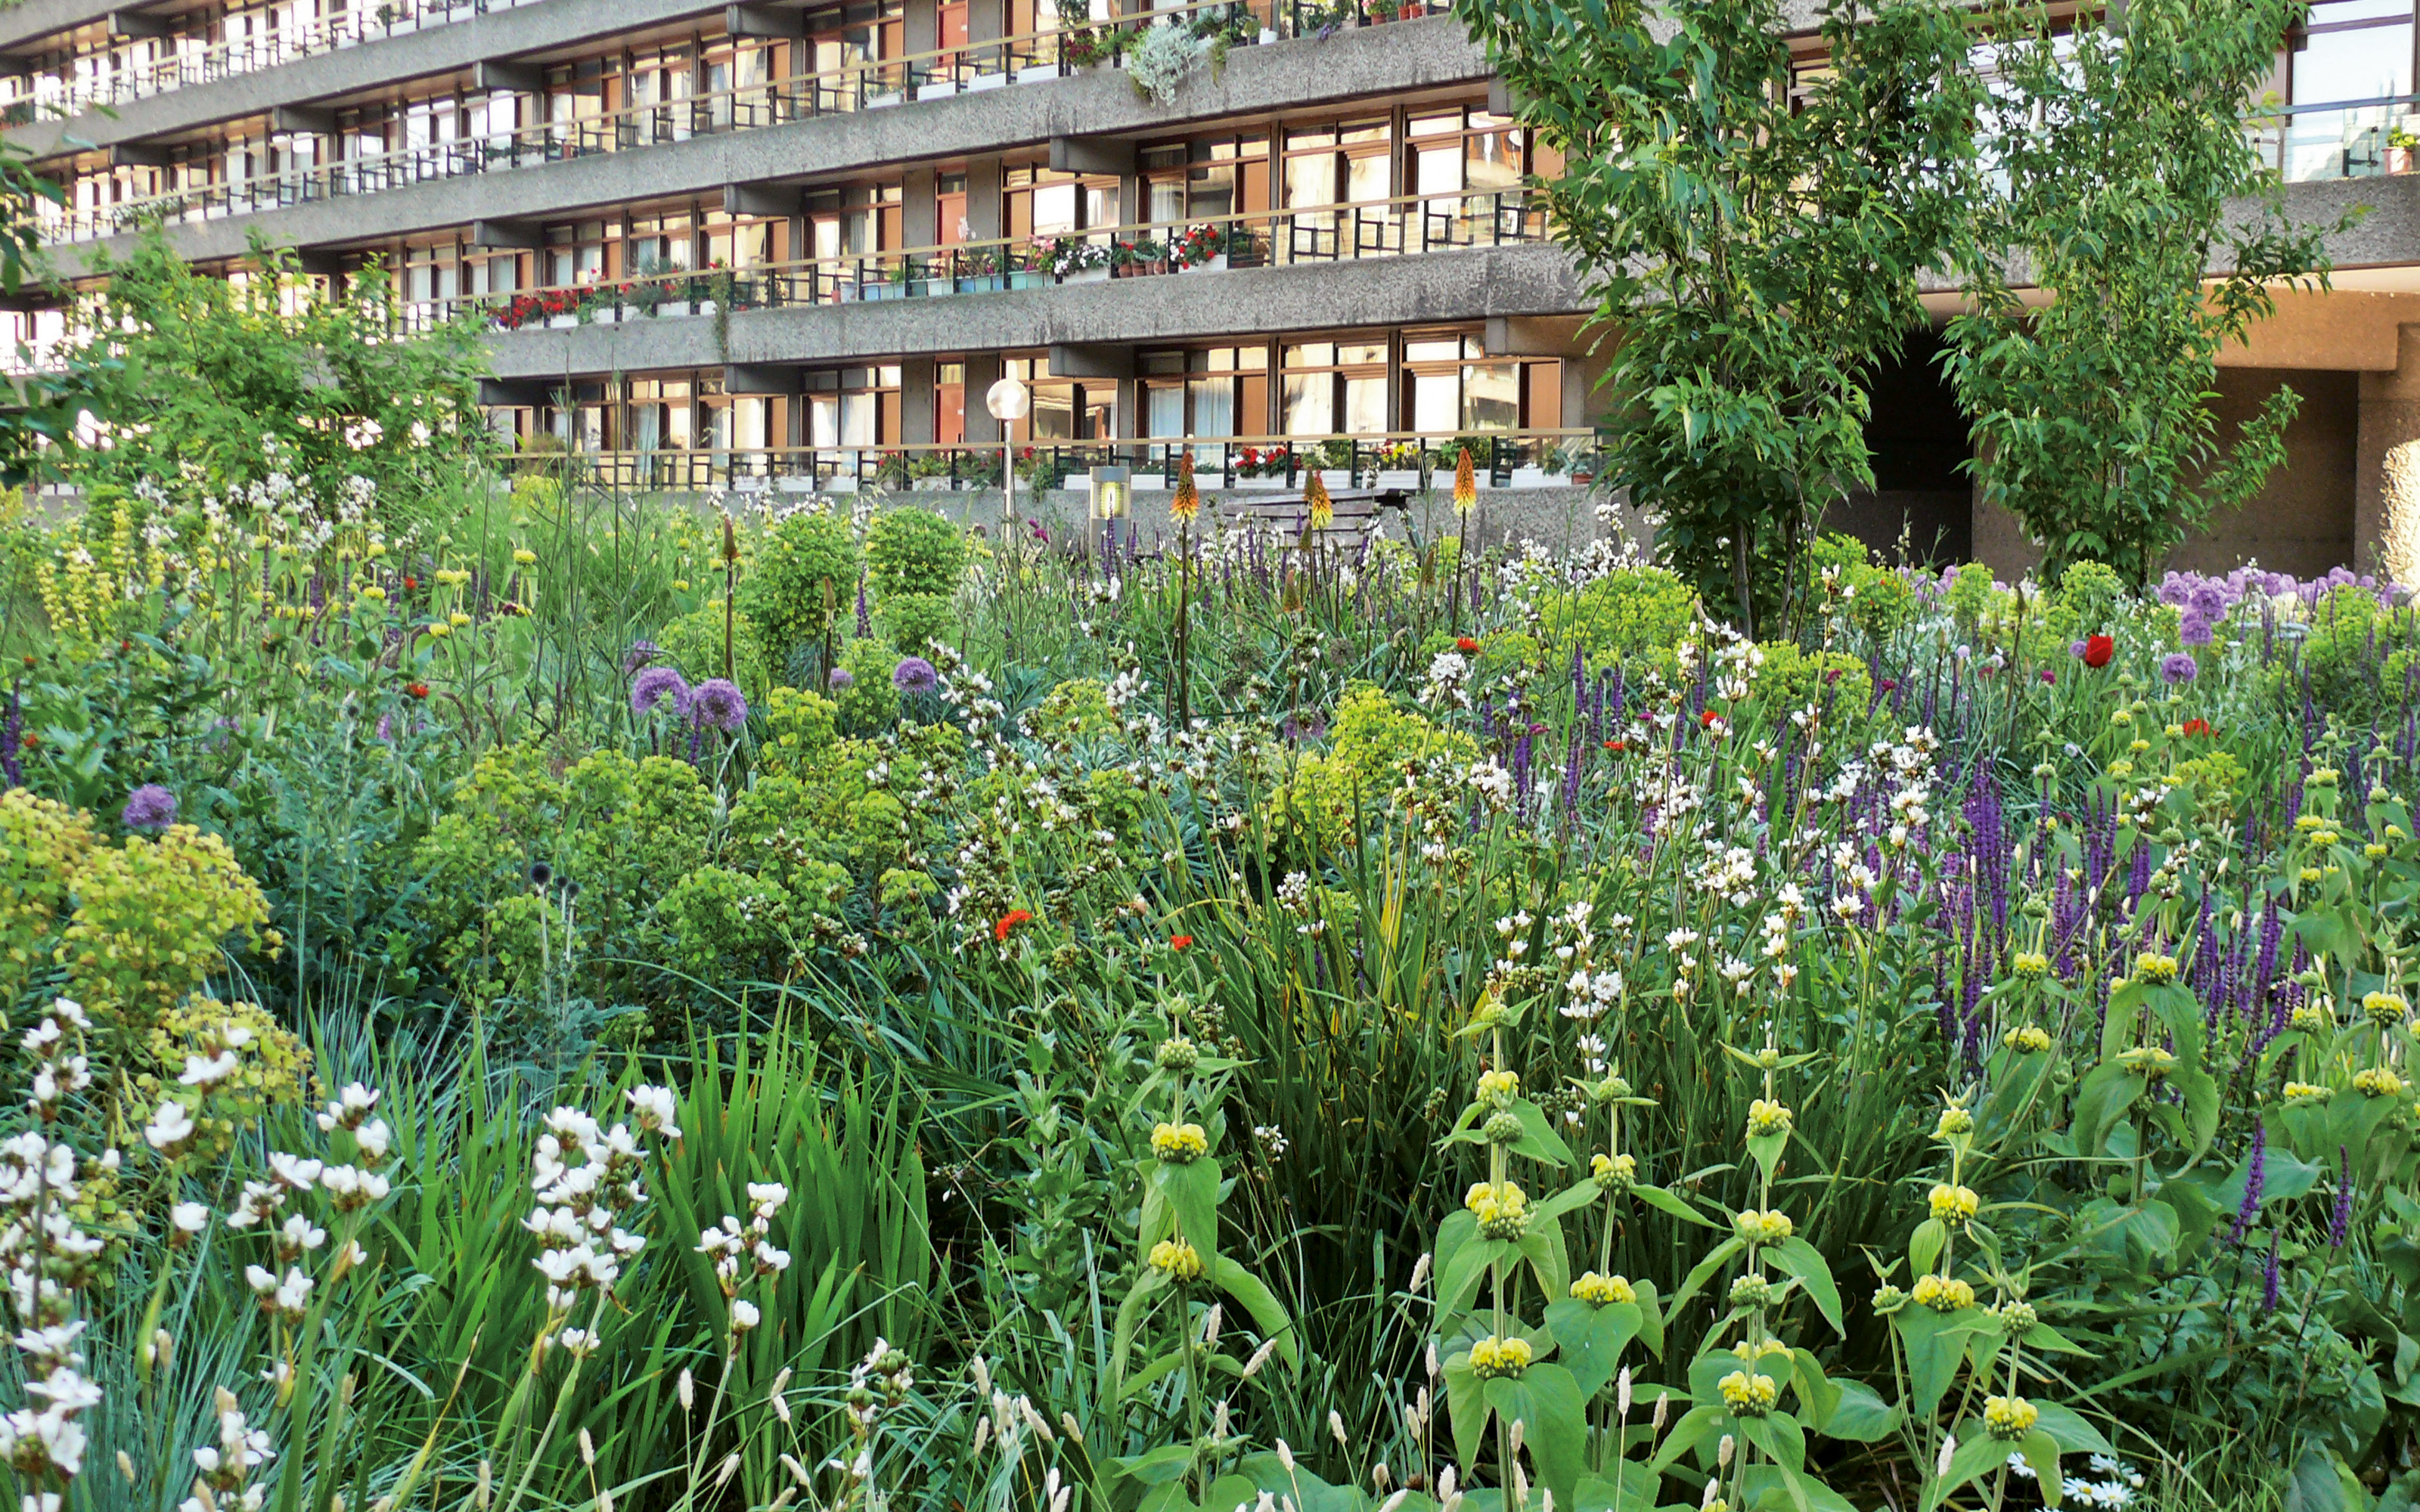 Colourful blooming meadow surrounded by residential blocks